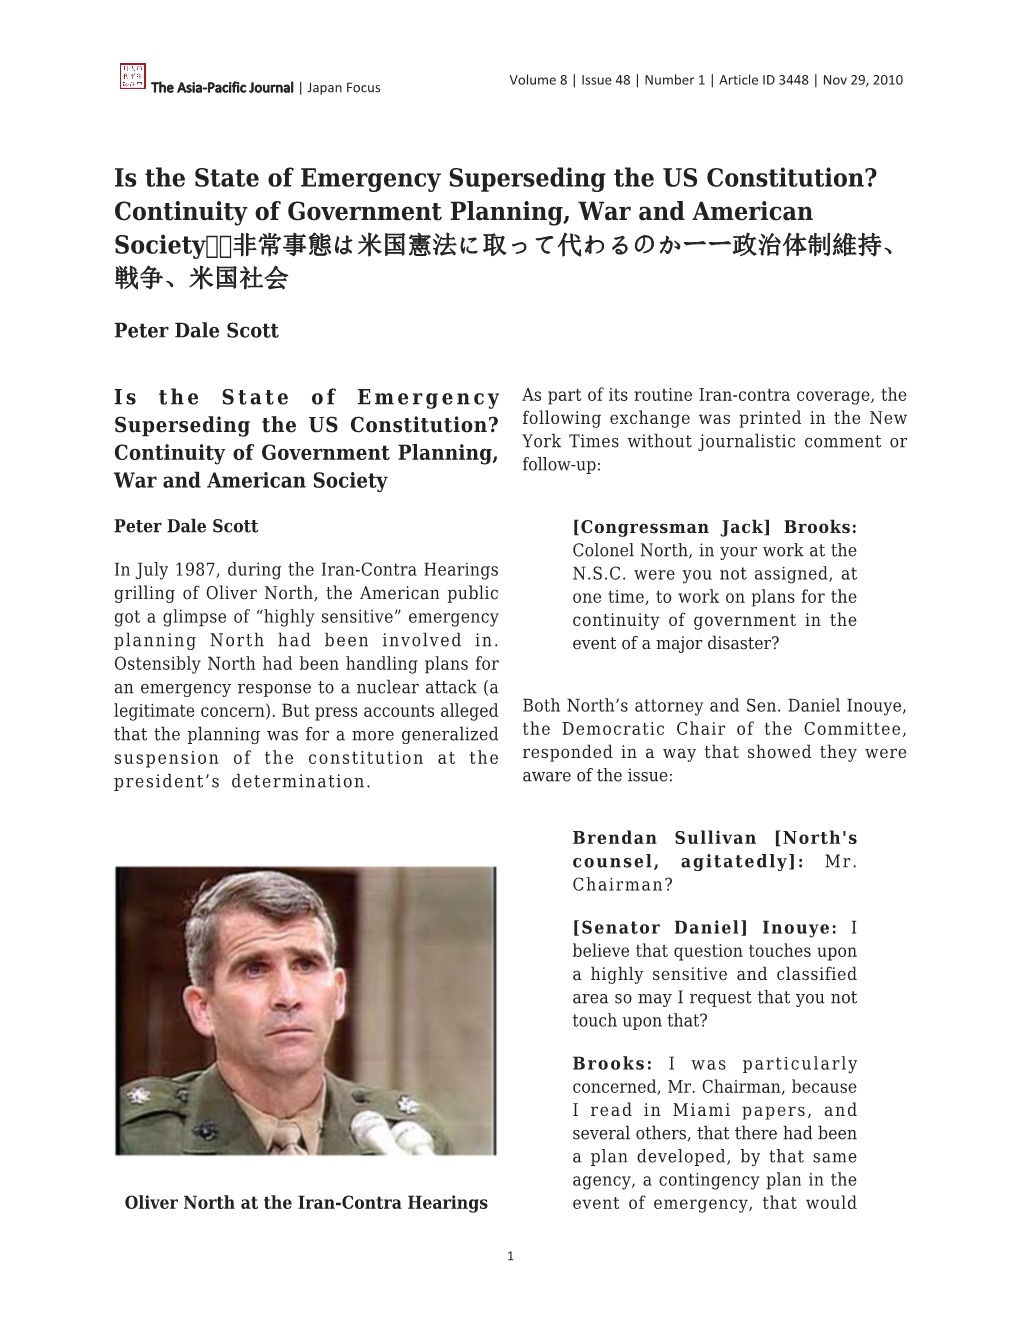 Is the State of Emergency Superseding the US Constitution? Continuity of Government Planning, War and American Society 非常事態は米国憲法に取って代わるのかーー政治体制維持、 戦争、米国社会